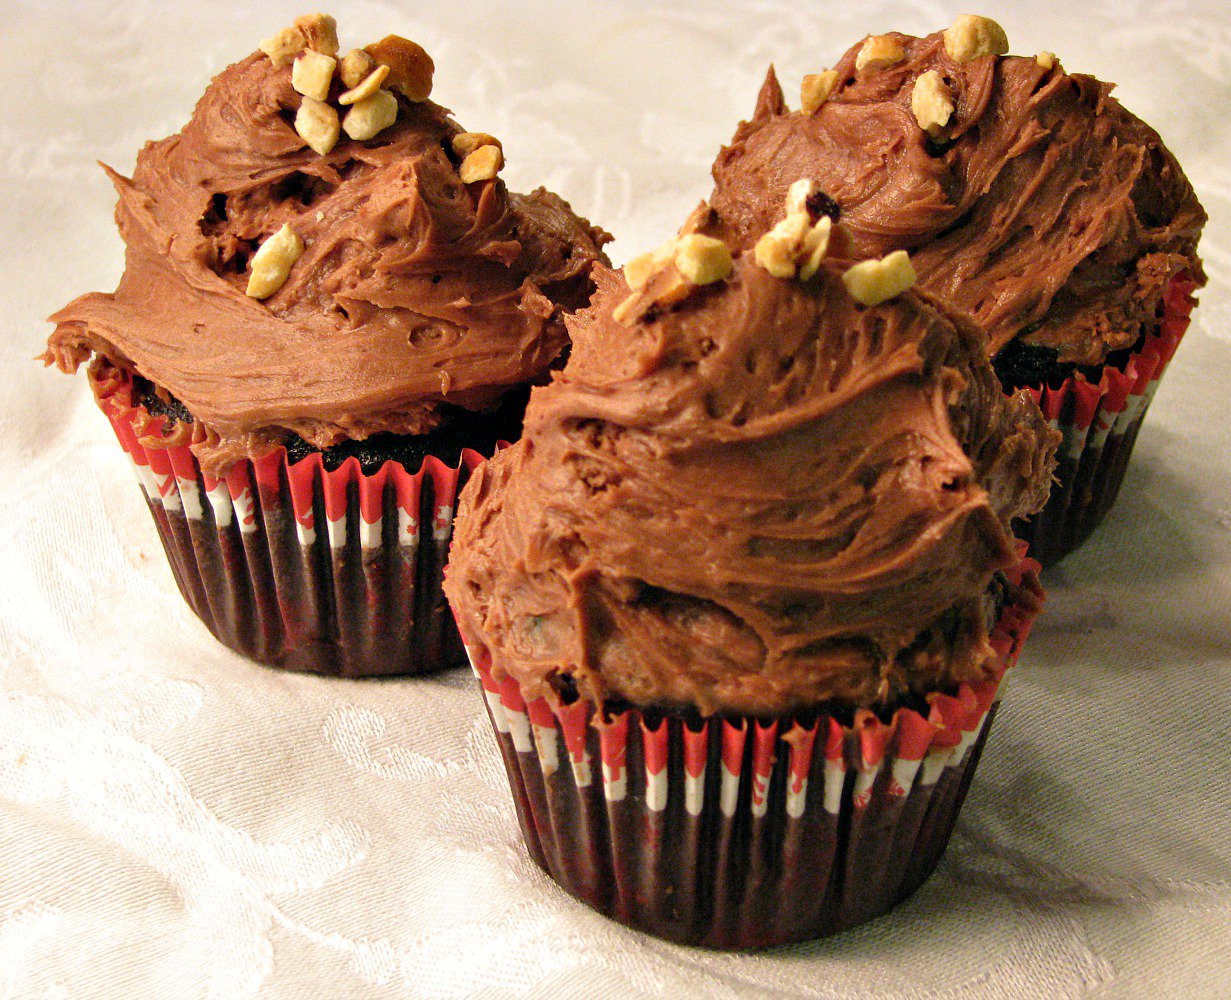 Chocolate Cupcakes with Nutella Frosting